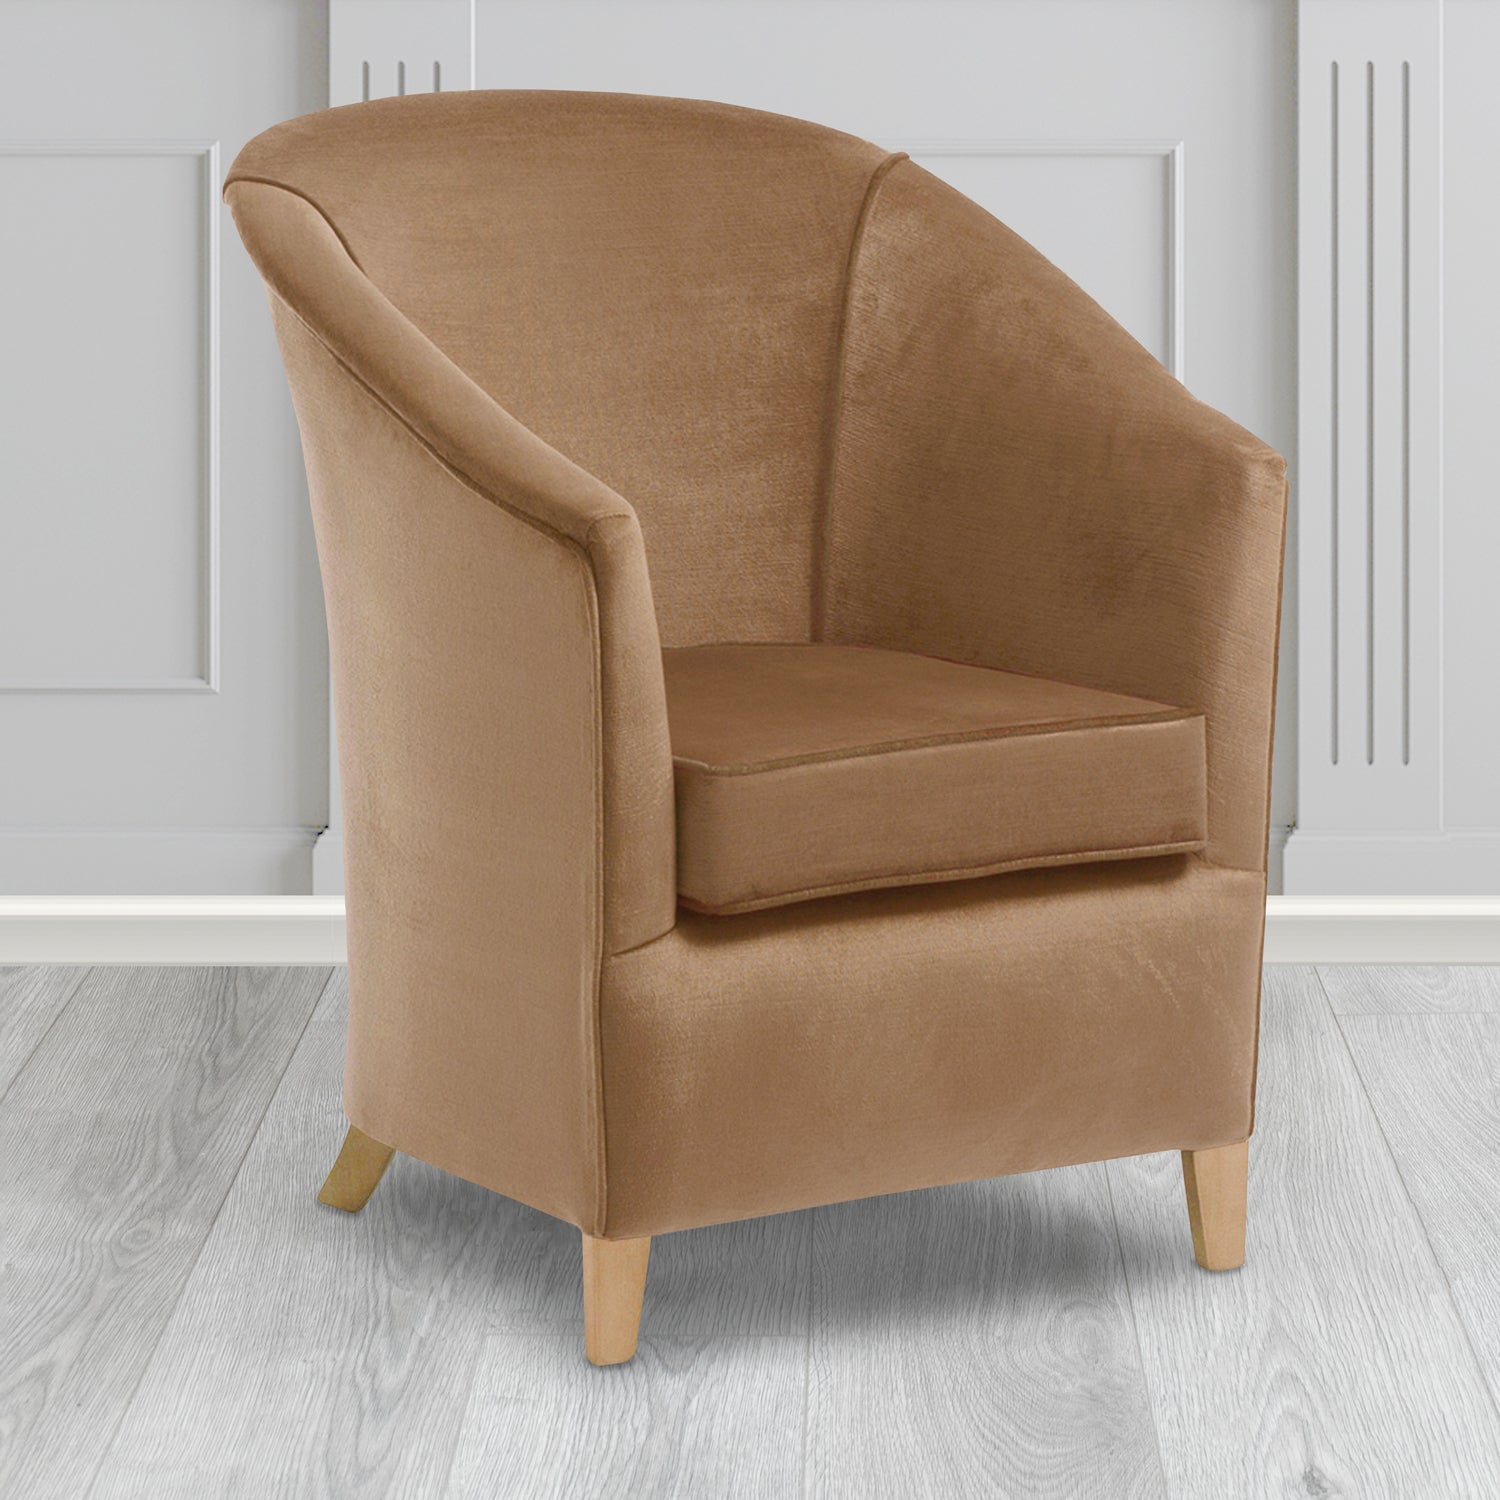 Bolton Tub Chair in Noble 806 Camel Crib 5 Velvet Fabric - Water Resistant - The Tub Chair Shop